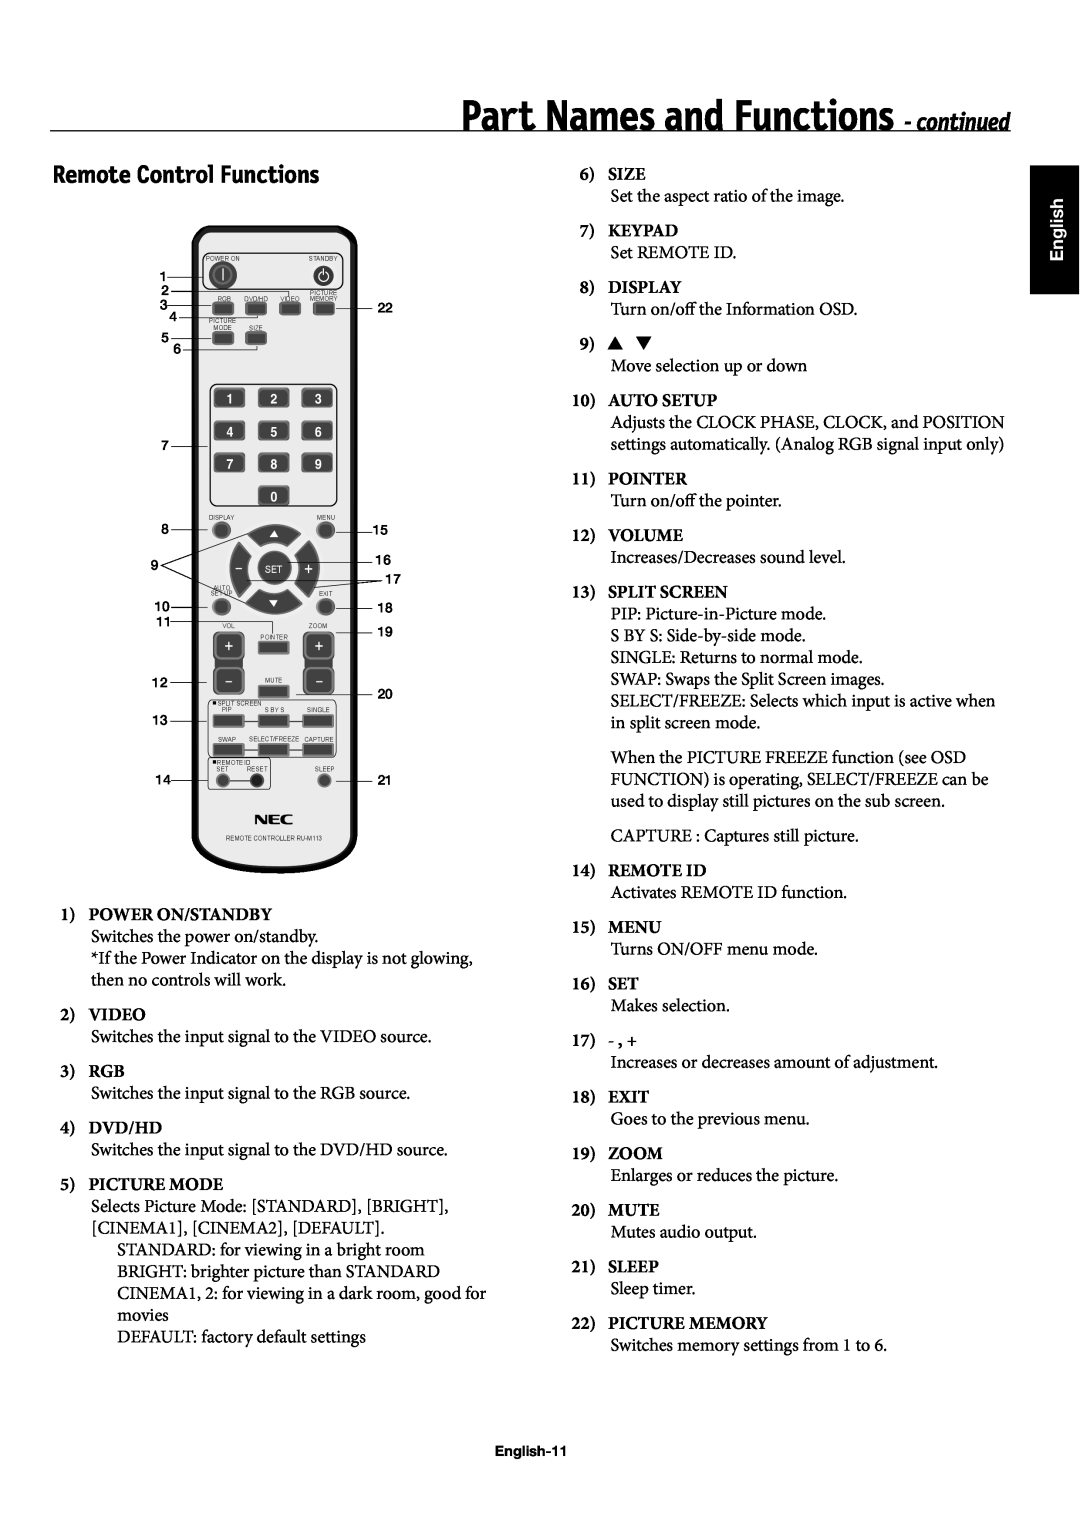 NEC 42XC10, 50XC10, 60XC10 user manual Part Names and Functions - continued, Remote Control Functions, English 